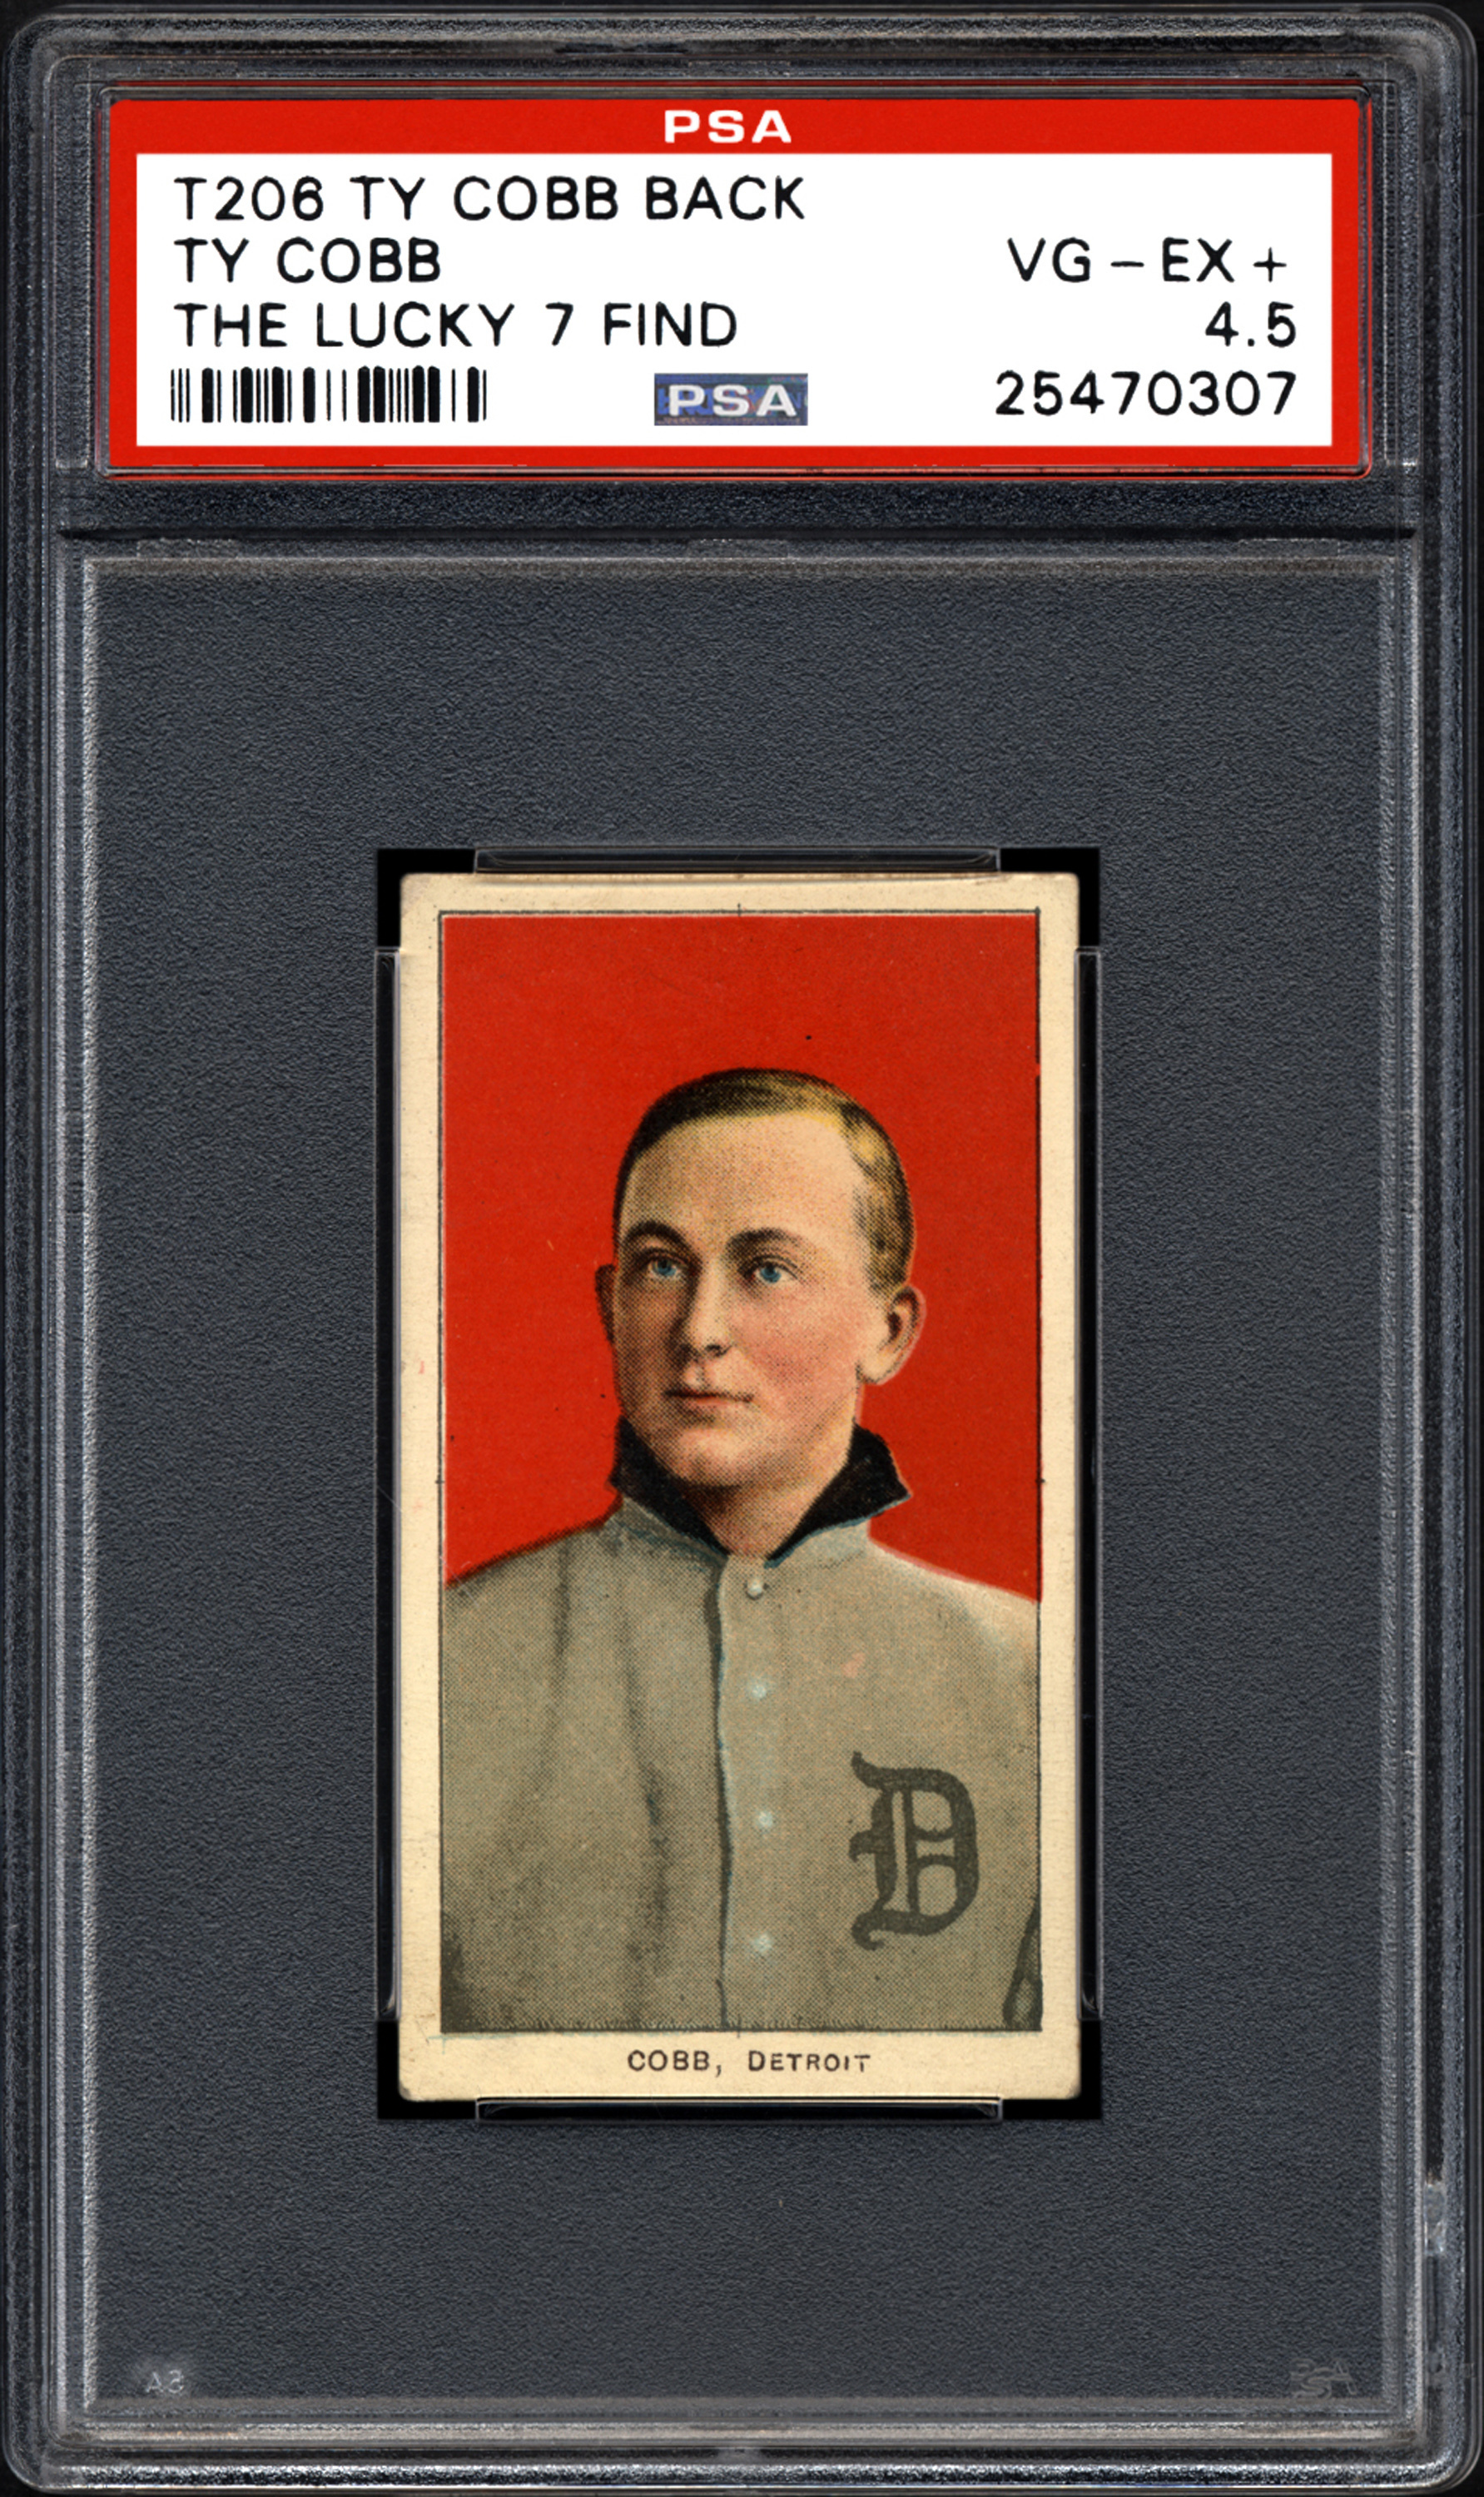 This undated photo provided by Professional Sports Authenticator shows one of seven Ty Cobb baseball cards, that were found crumpled inside a paper bag in a dilapidated house. Card experts in Southern California say they have verified the legitimacy, and seven-figure value, of the seven identical Ty Cobb cards from the printing period of 1909 to 1911. Before the recent find there were only about 15 known to still exist. (Professional Sports Authenticator/AP)